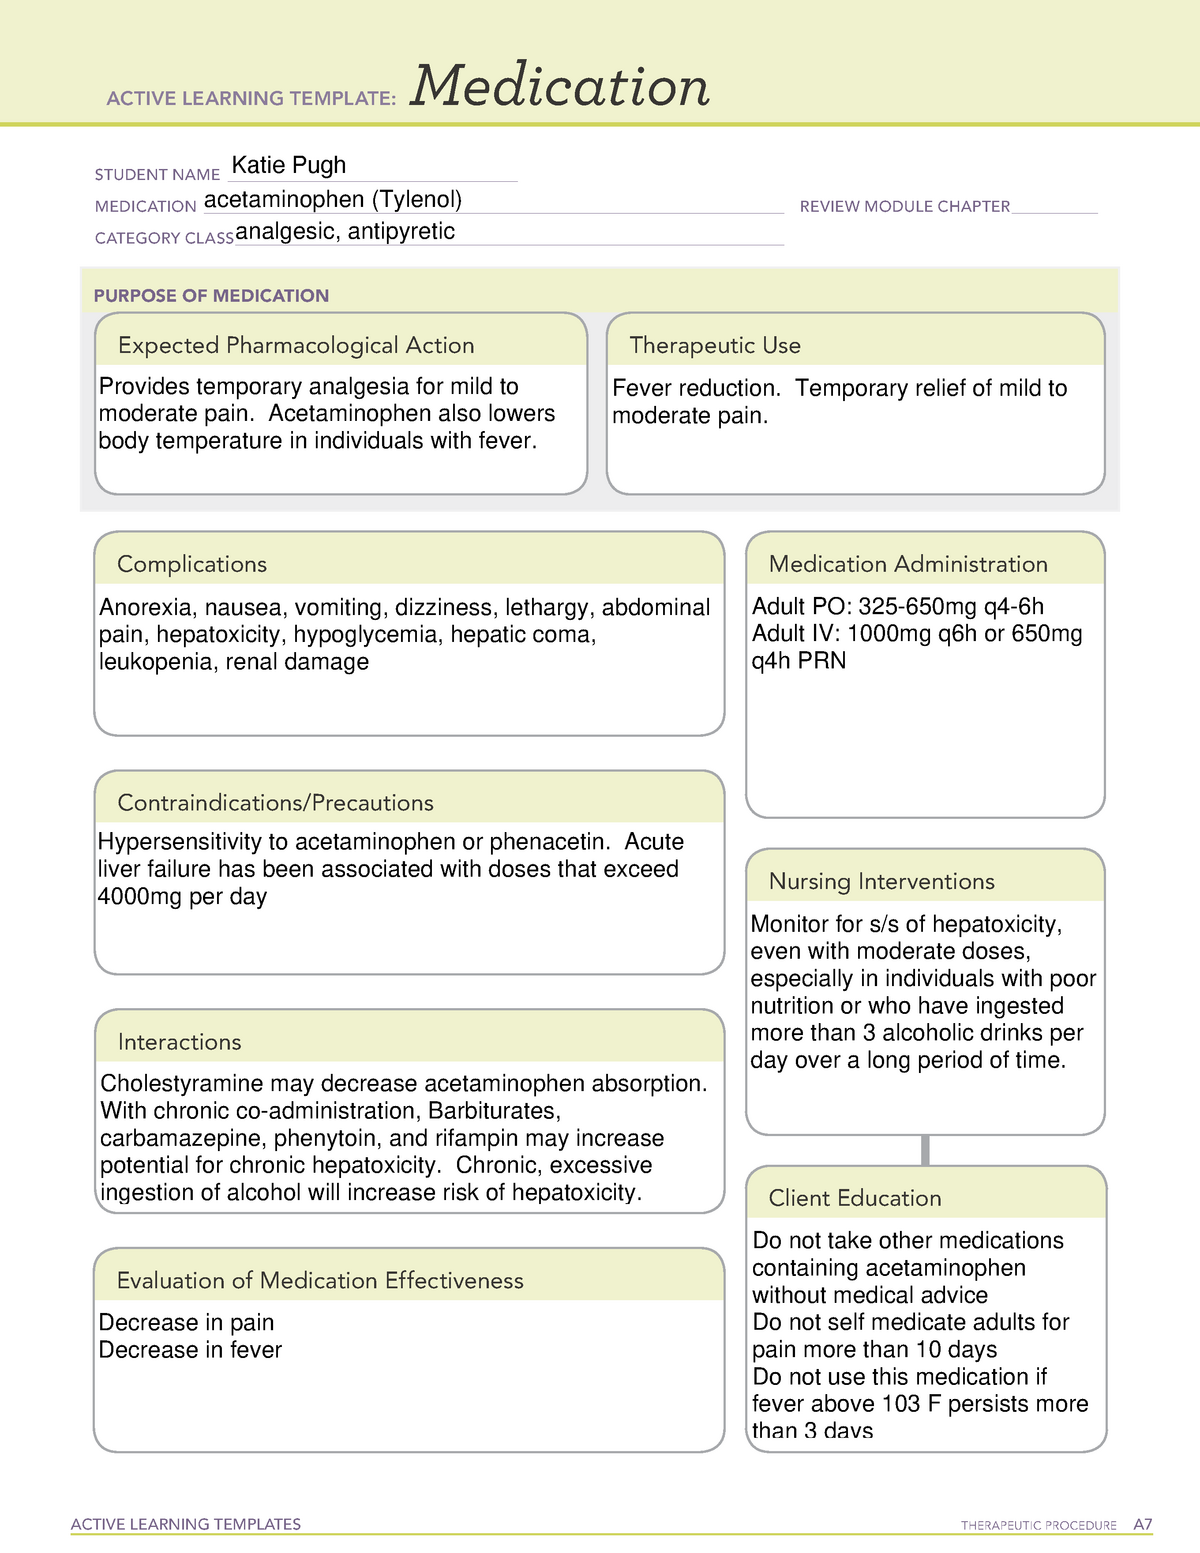 ATI Acetaminophen Active Learning Template ACTIVE LEARNING TEMPLATES THERAPEUTIC PROCEDURE A